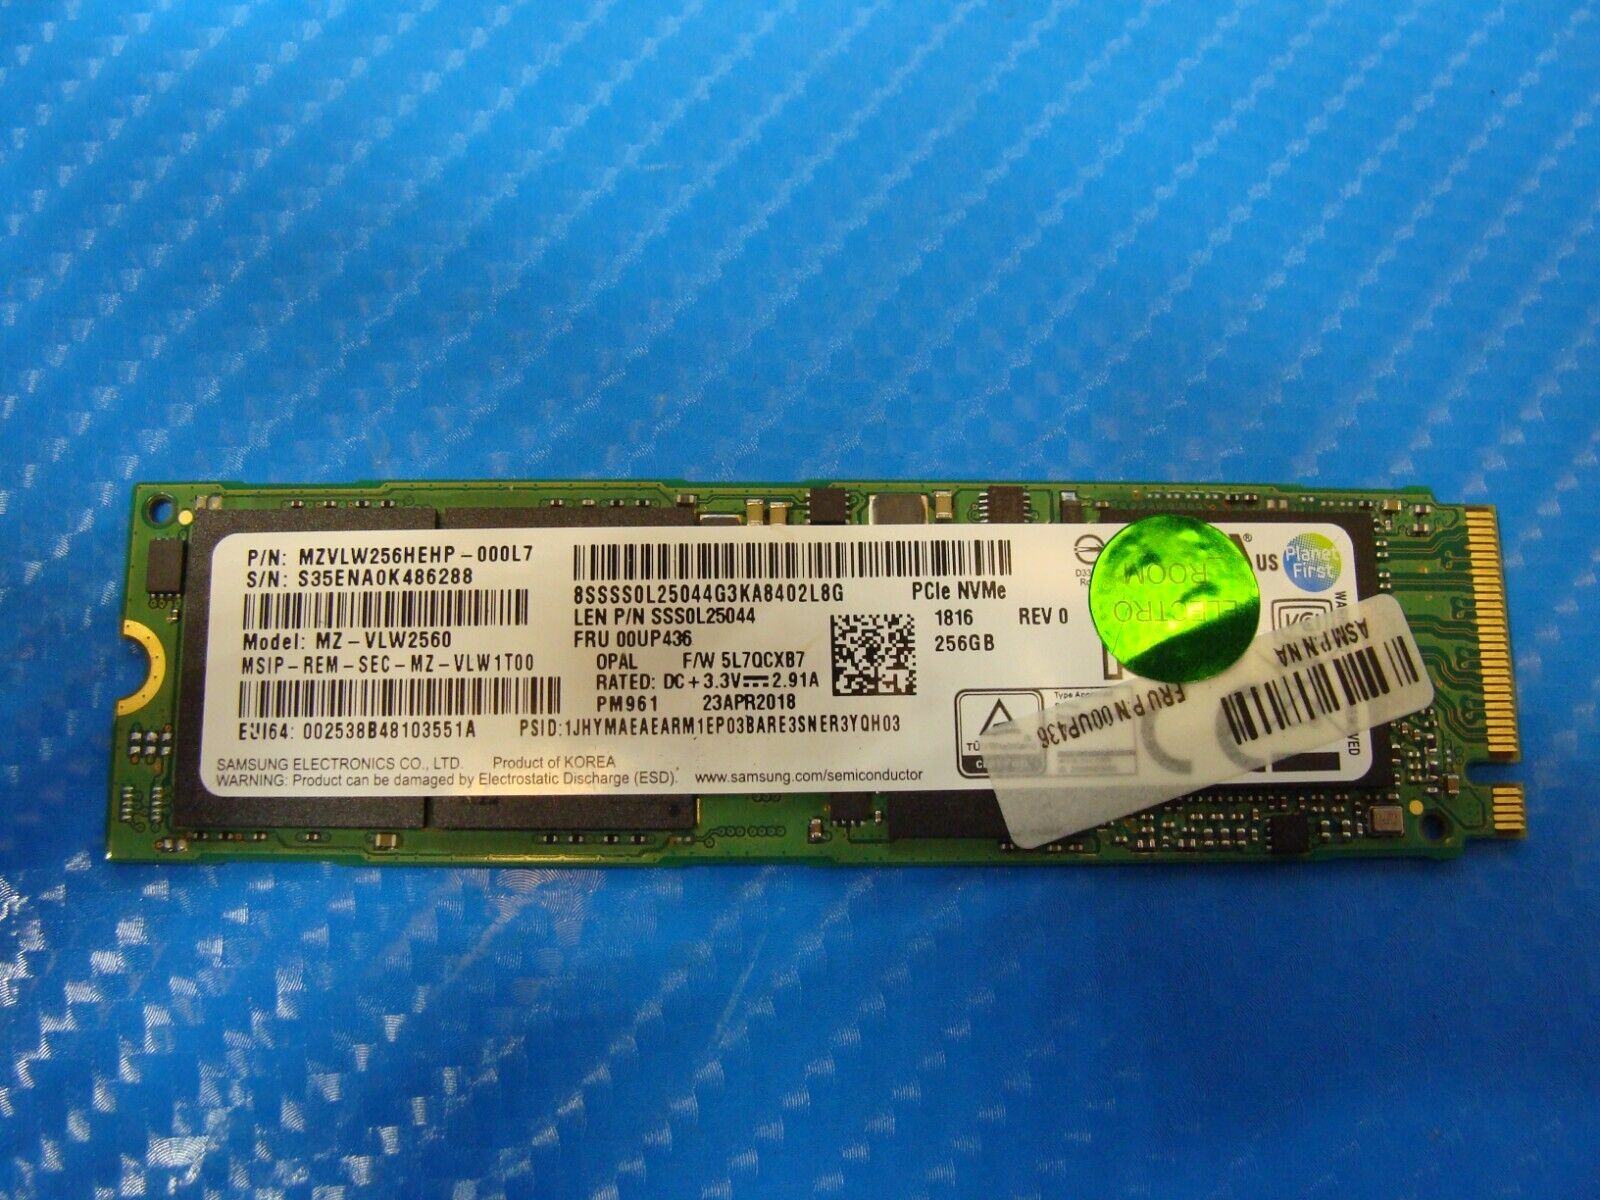 Lenovo E570 256GB SSD NVMe M.2 Solid State Drive 00UP436 SSS0L25044